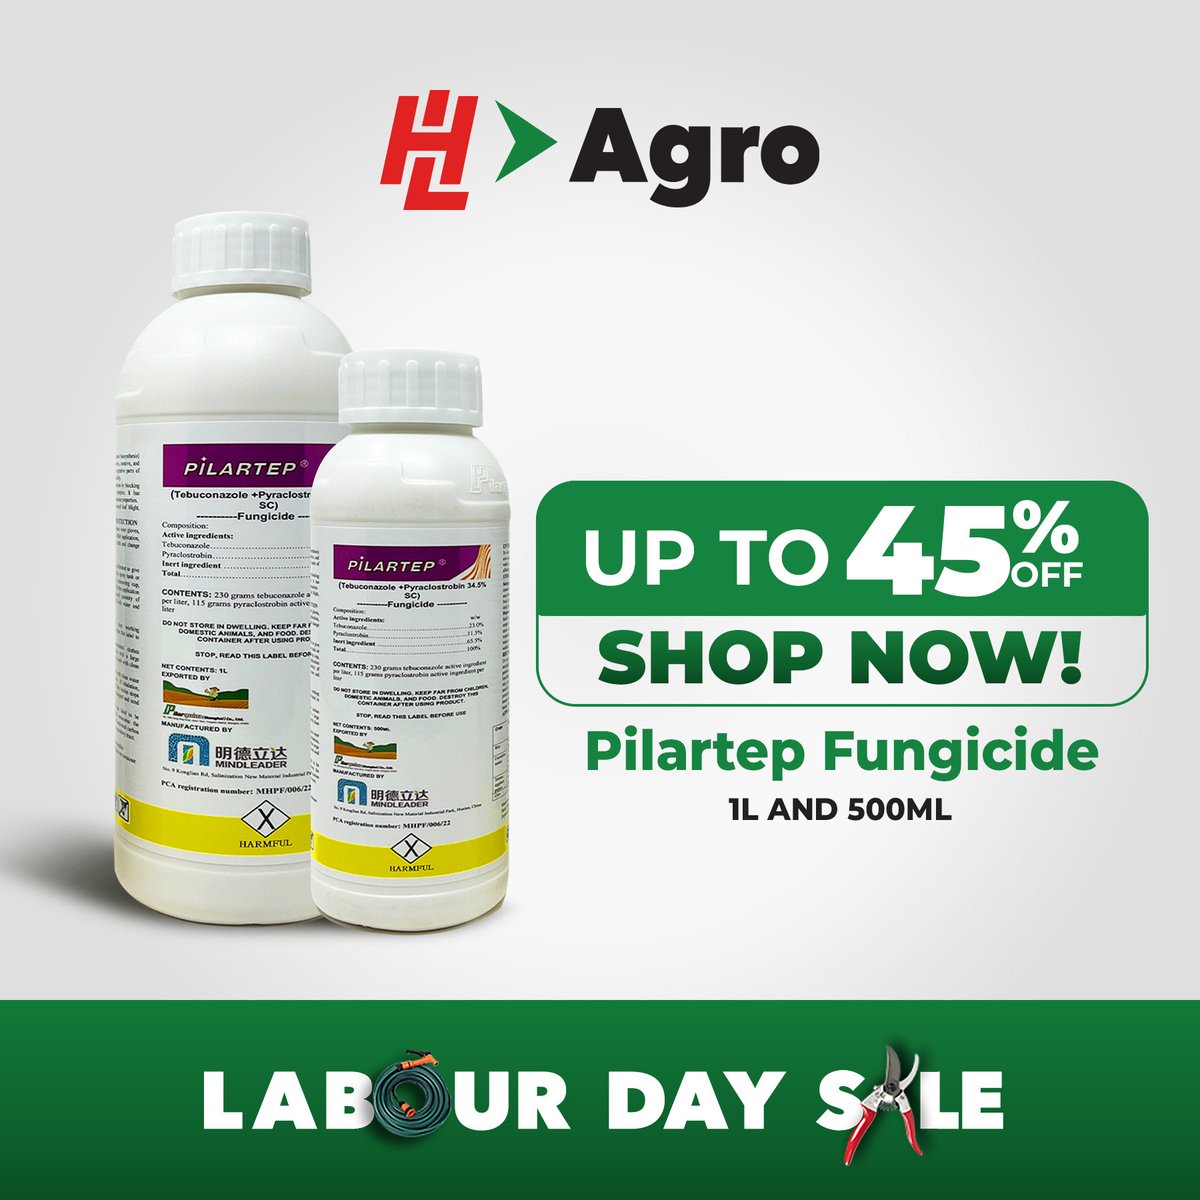 Celebrate the Labour Day Sale with up to 48% off Pilarquim Fungicides! Visit any of our stores today and take advantage of this amazing offer. #HLAgro #LabourDaySale #PilarquimFungicides #StockUpAndSave